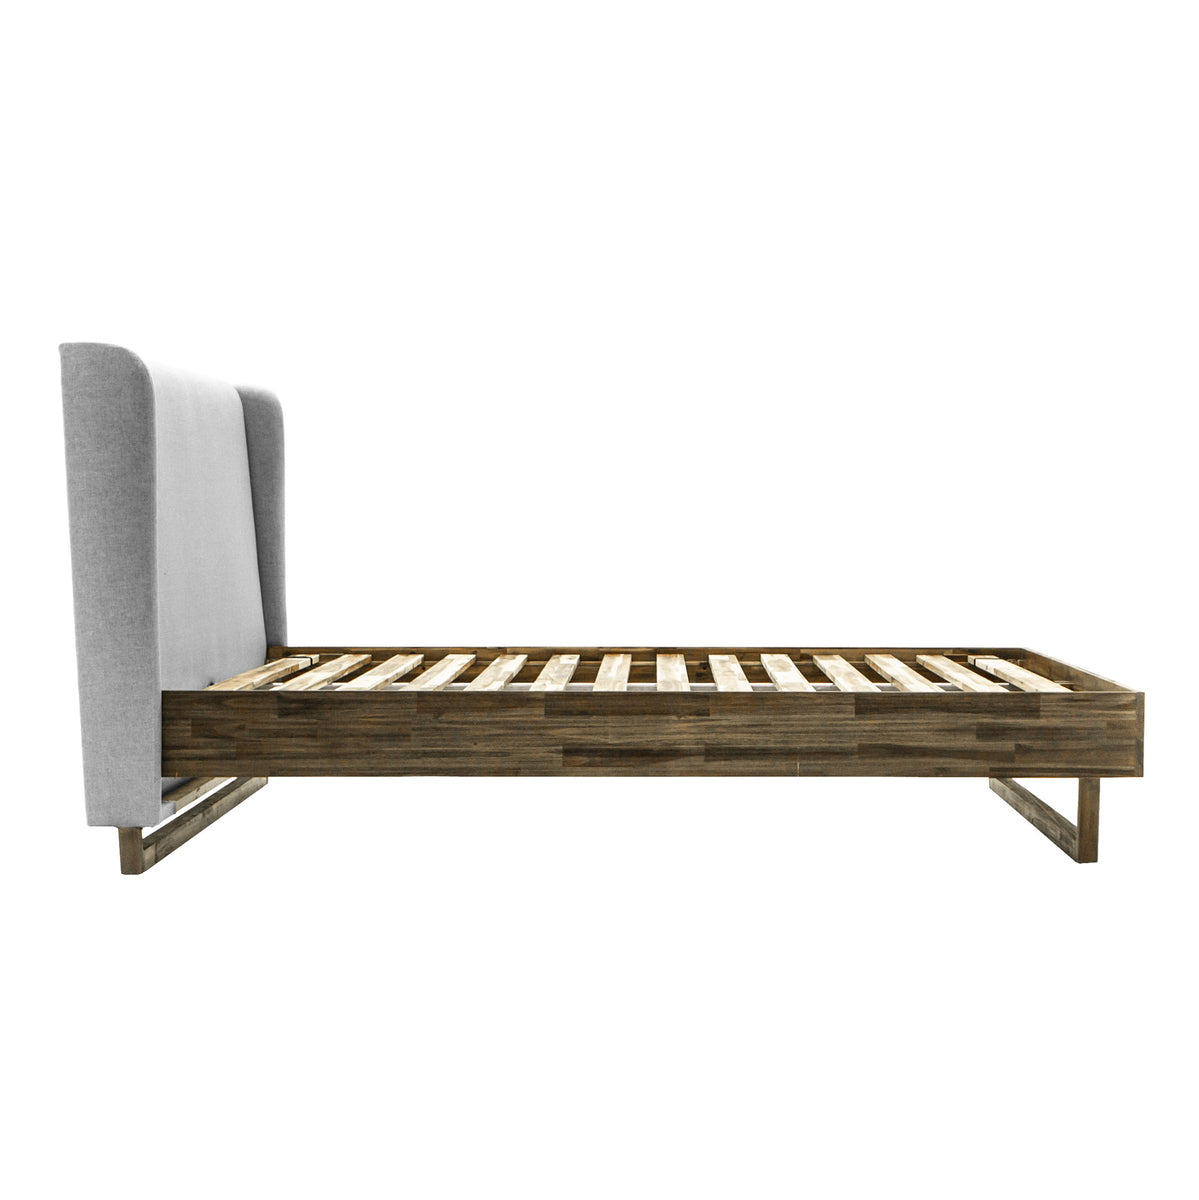 LH Imports Aura Bed. Solid acacia wood frame and legs. Greige linen look polyester fabric headboard. Solid wood slats no-boxspring required. Transitional style. 